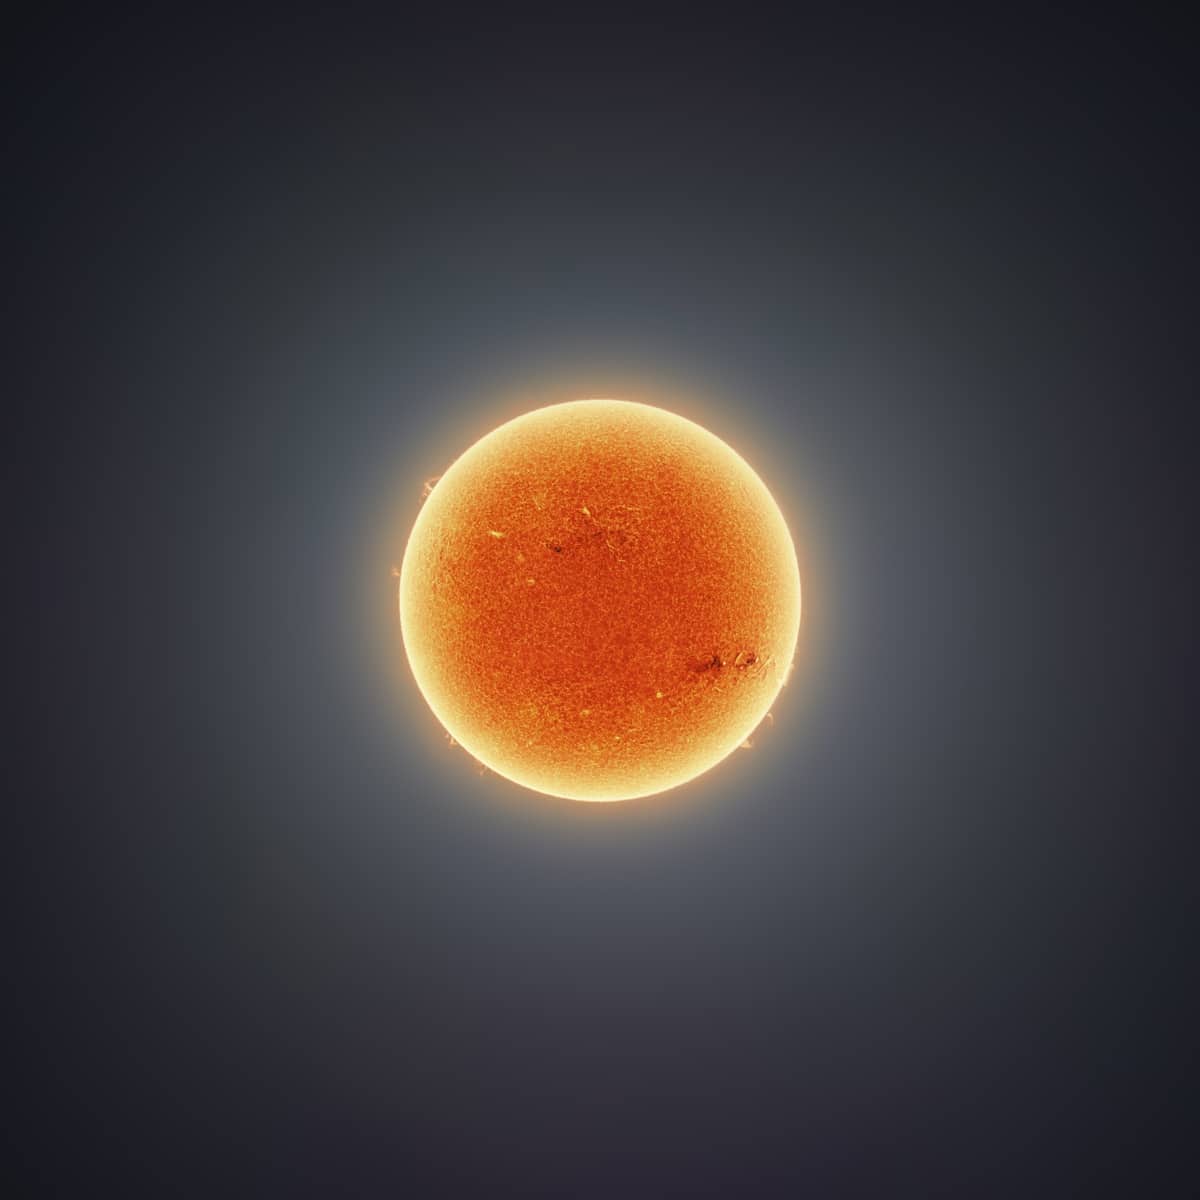 300-Megapixel Image Of The Sun By Andrew McCarthy